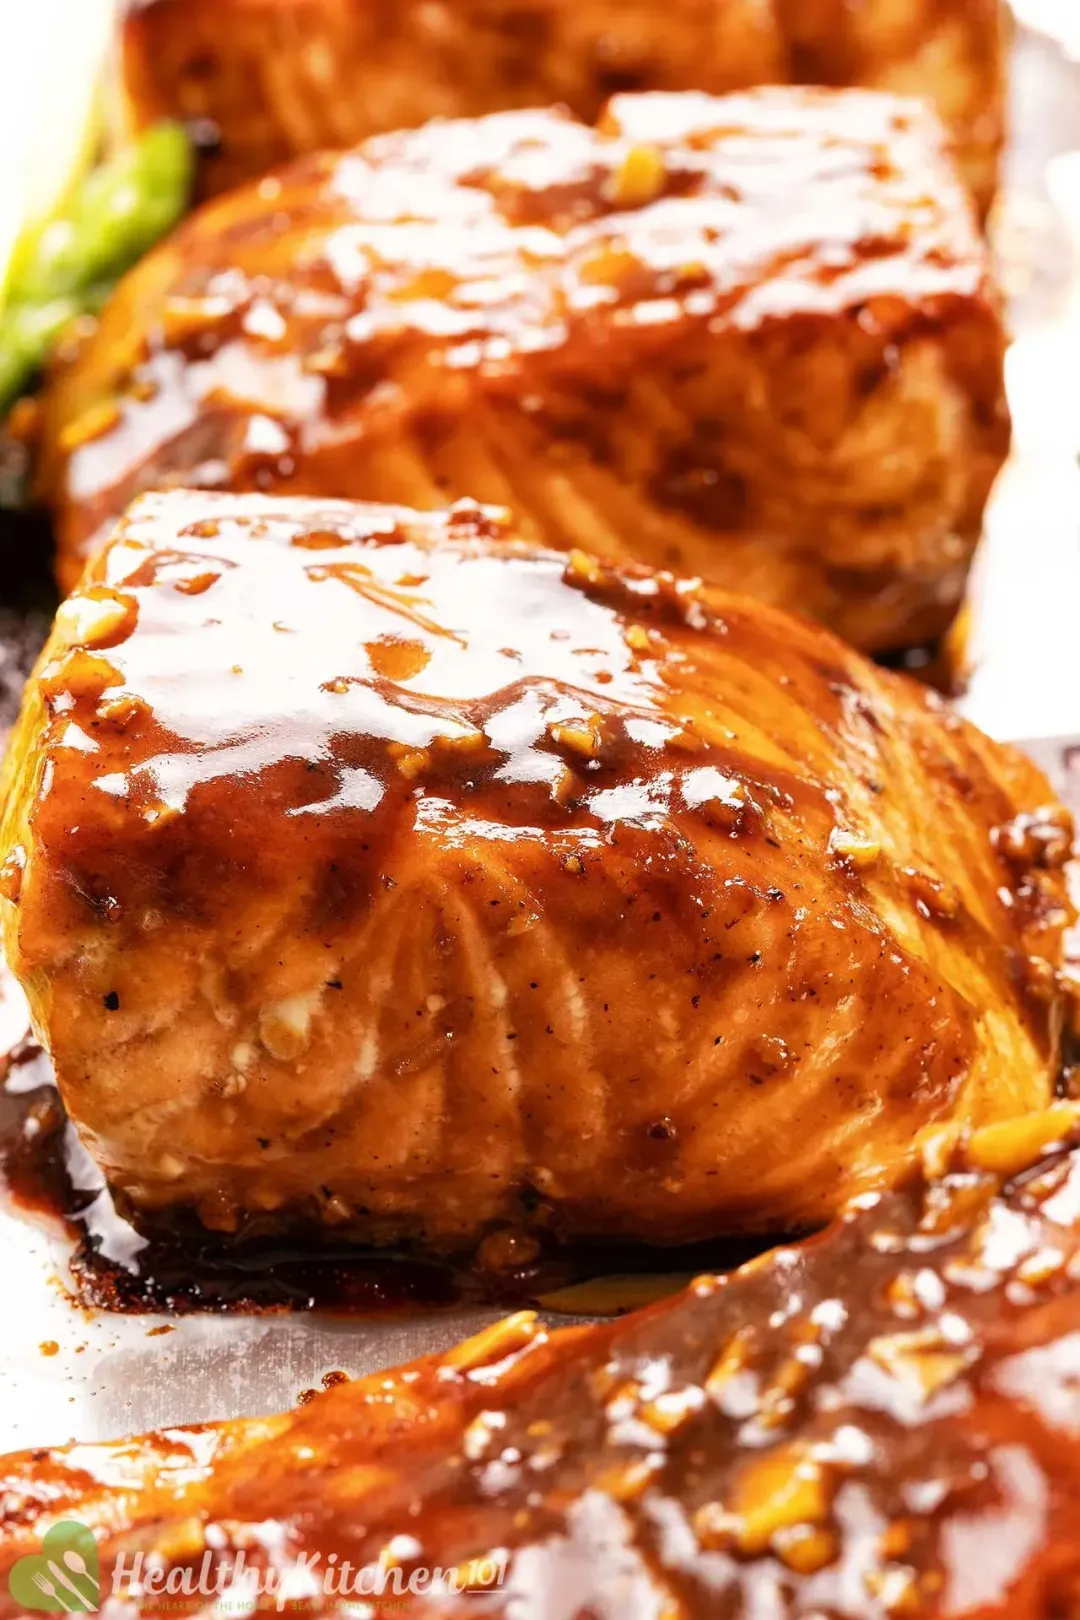 A close view of baked salmon filets coated in a generous amount of teriyaki sauce.